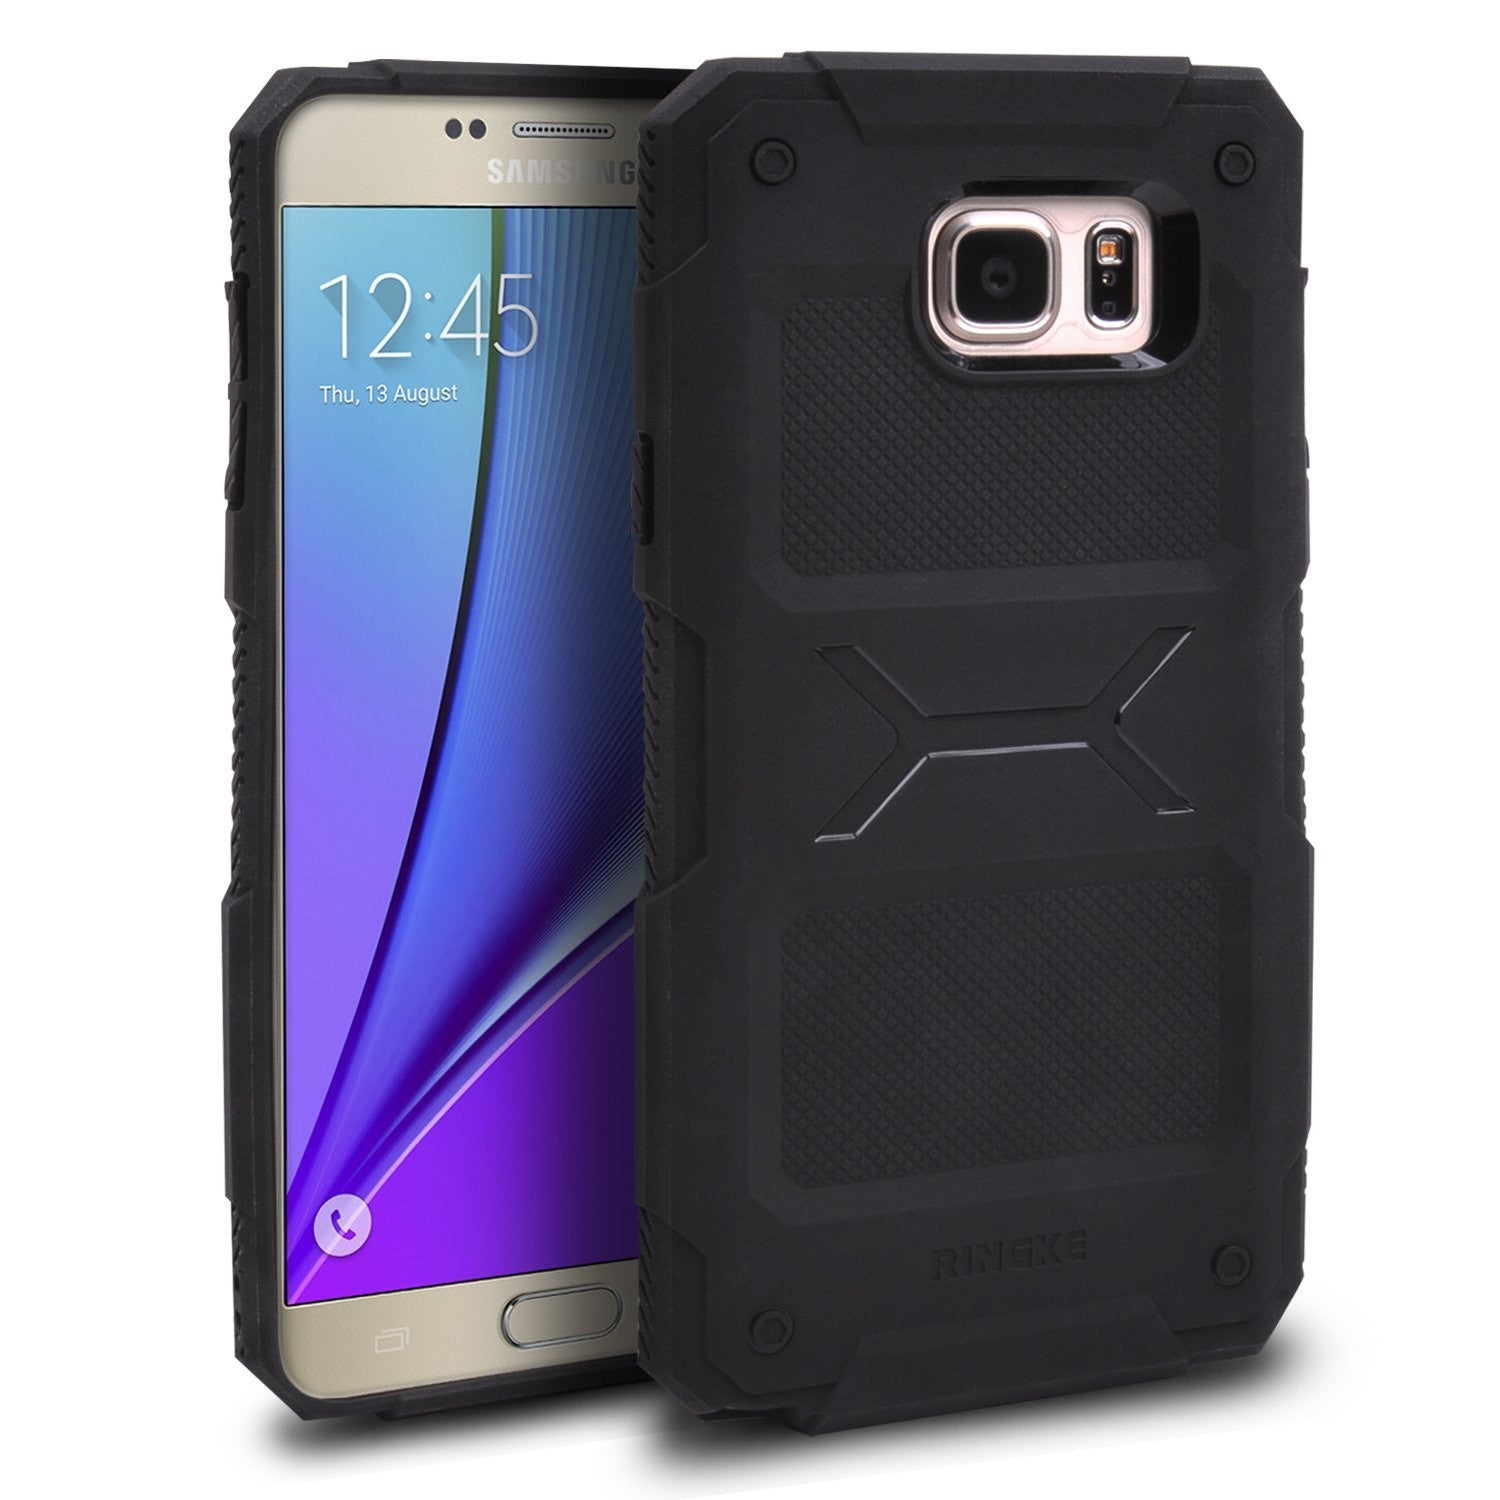 ringke rebel case for samsung galaxy note 5